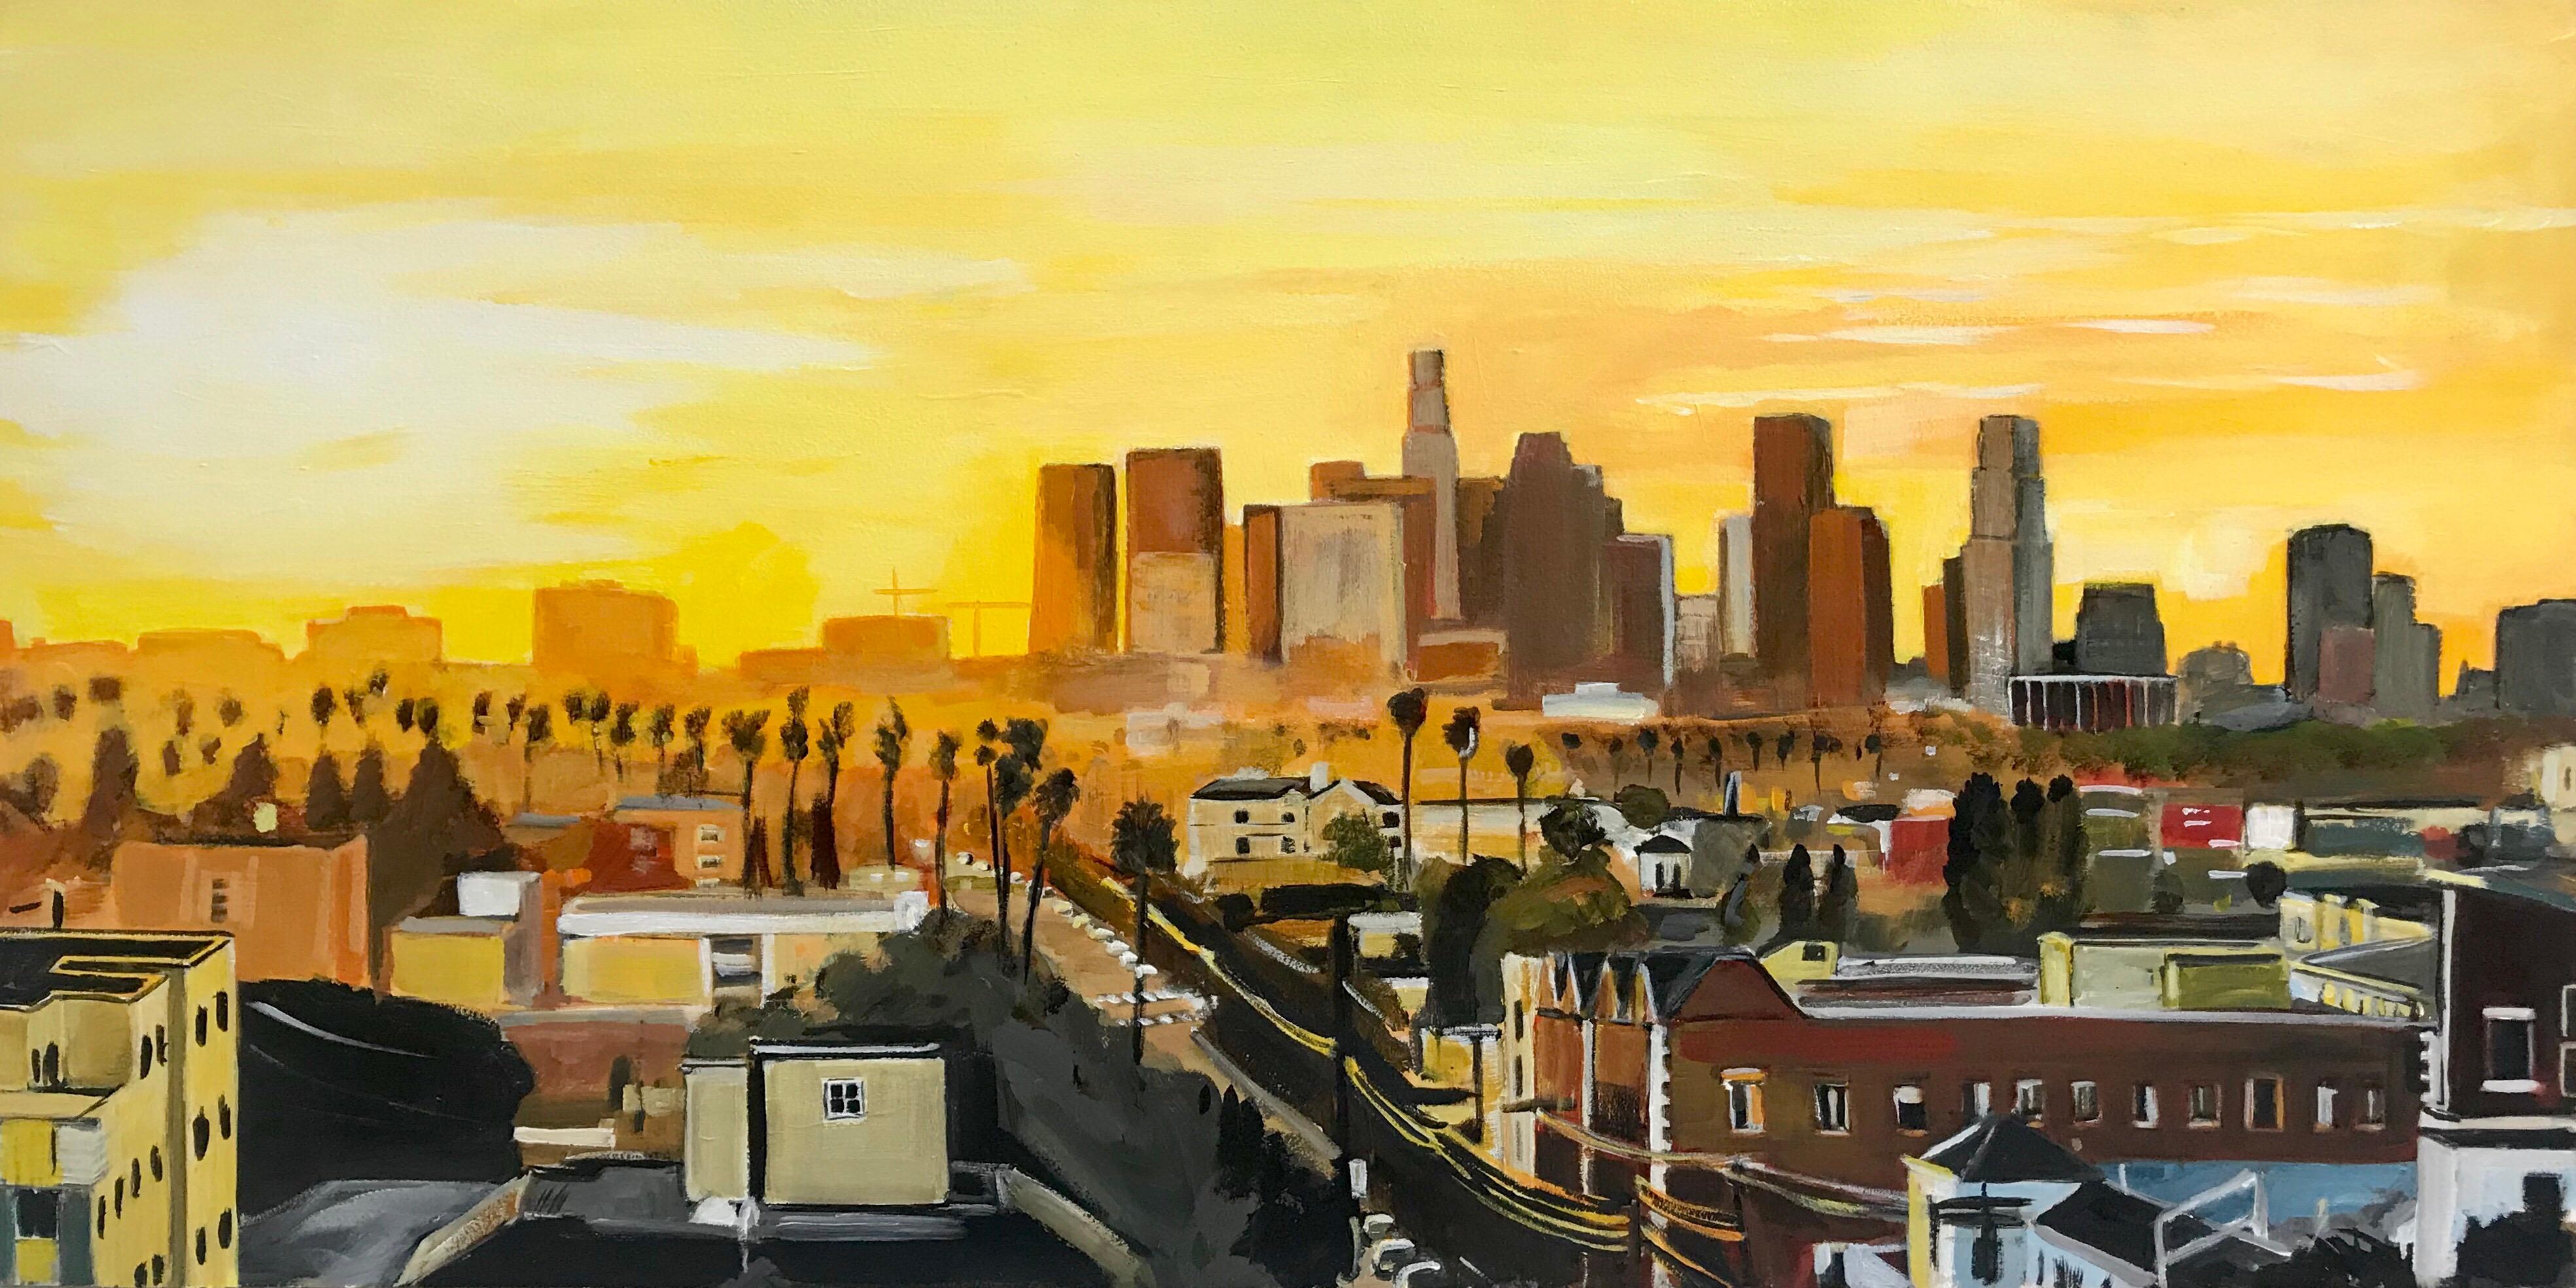 Painting of Sunset in Los Angeles California USA by British Urban Landscape Artist, Angela Wakefield. This painting is on high quality art board, painted in superior artist quality acrylic paint. 

Art measures 24 x 12 inches
Frame measures 29 x 17